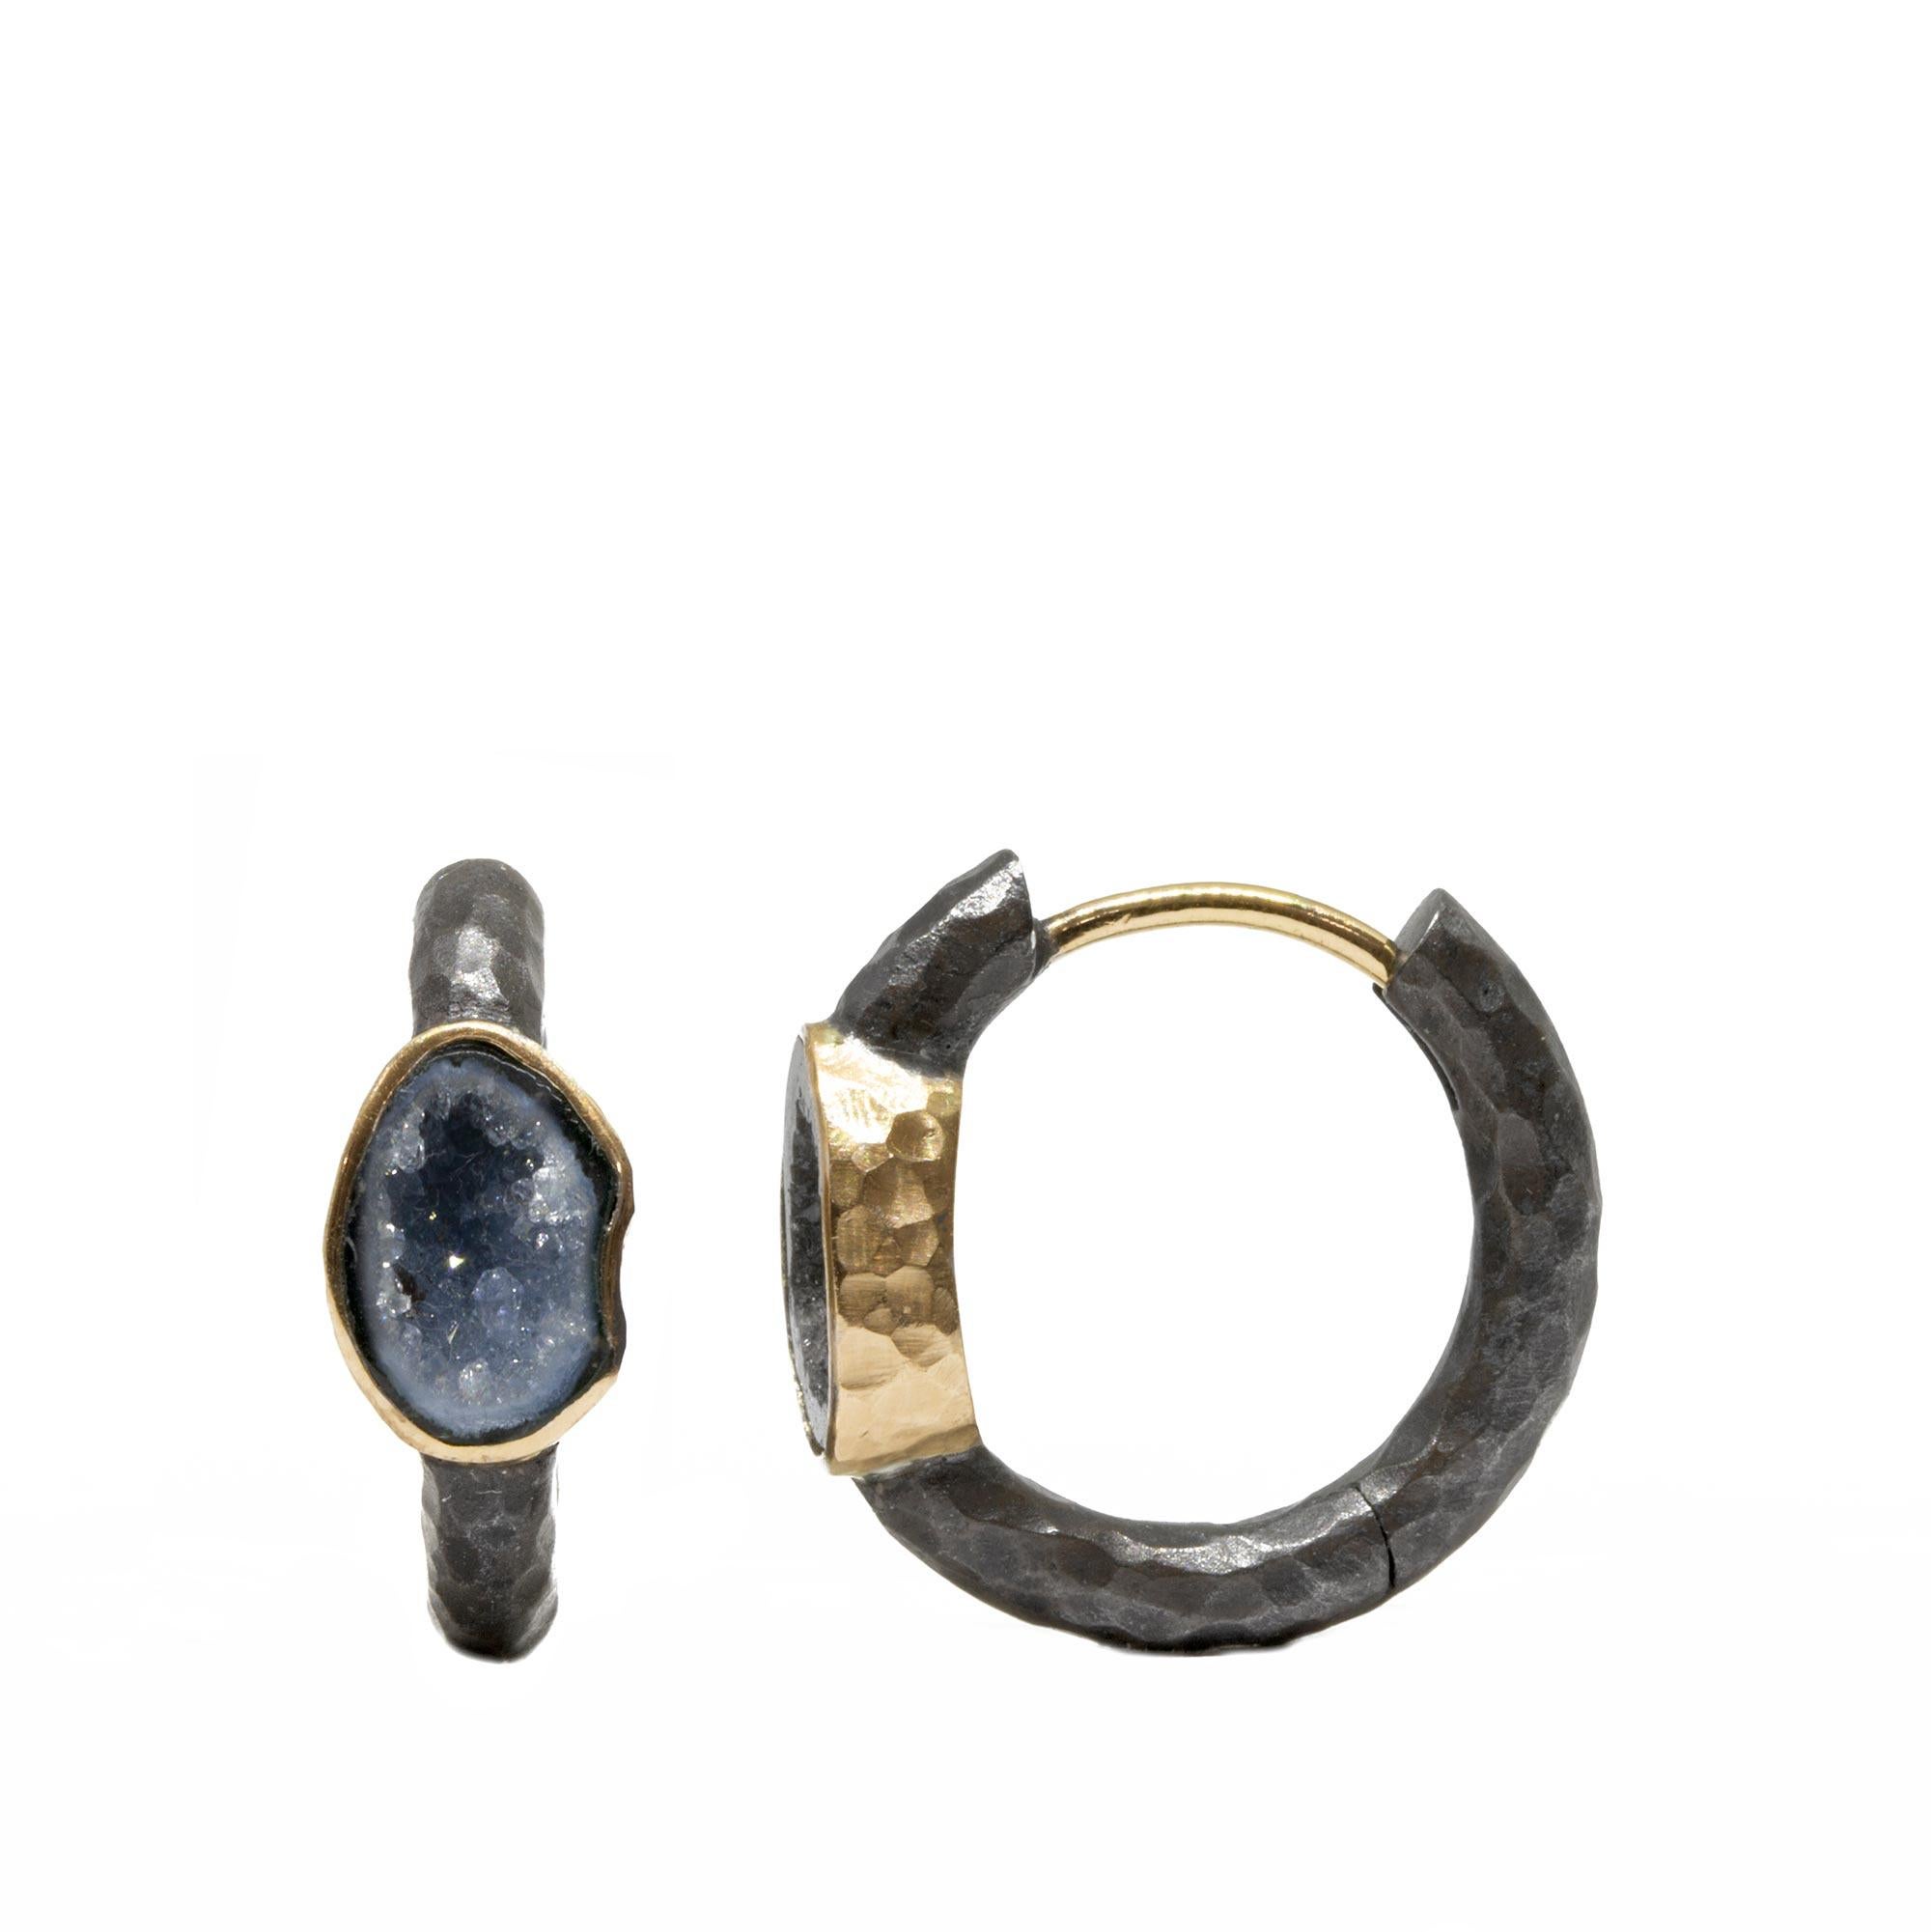 Made with textured blackened sterling silver and go-with-everything black geodes, the Element Mini Geode Silver Hoop Earrings are rock stars in every way. Each stone is set in an 18k gold bezel for a hint of contrast and shine. Add charms with an